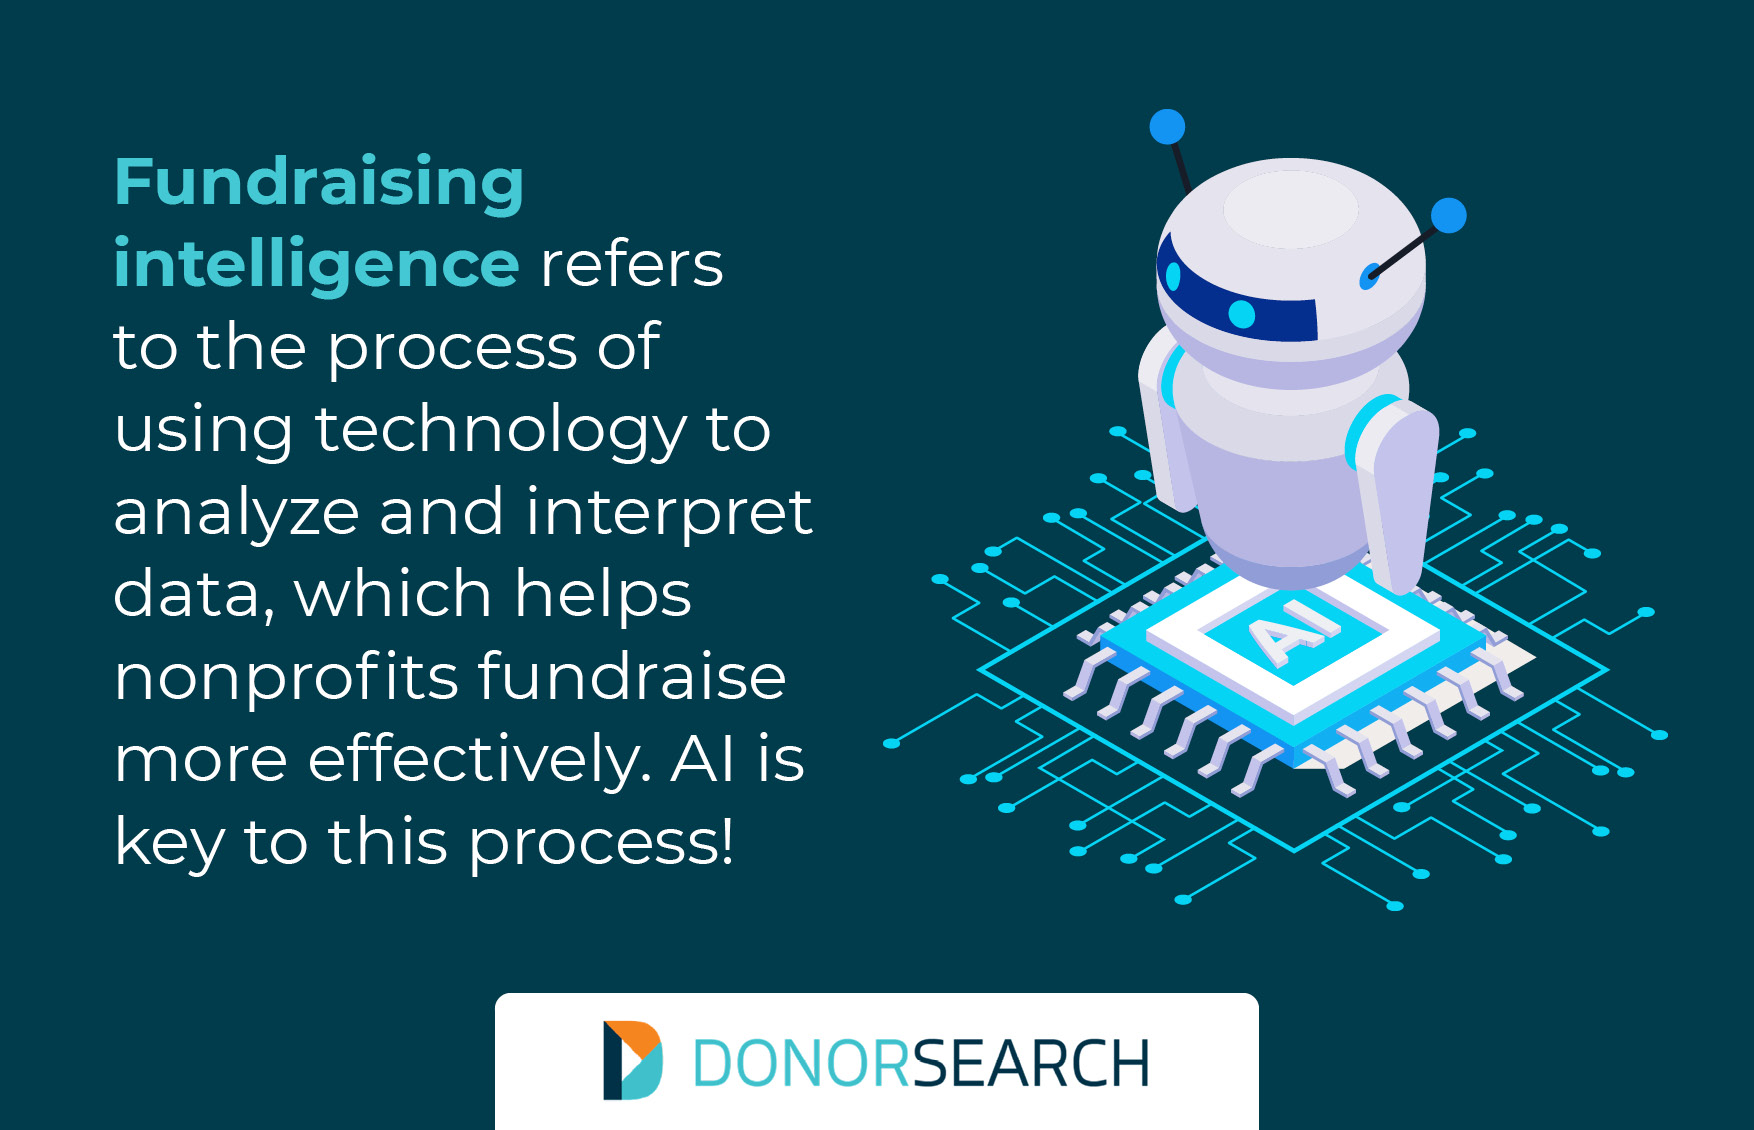 This image and the text below define fundraising intelligence.